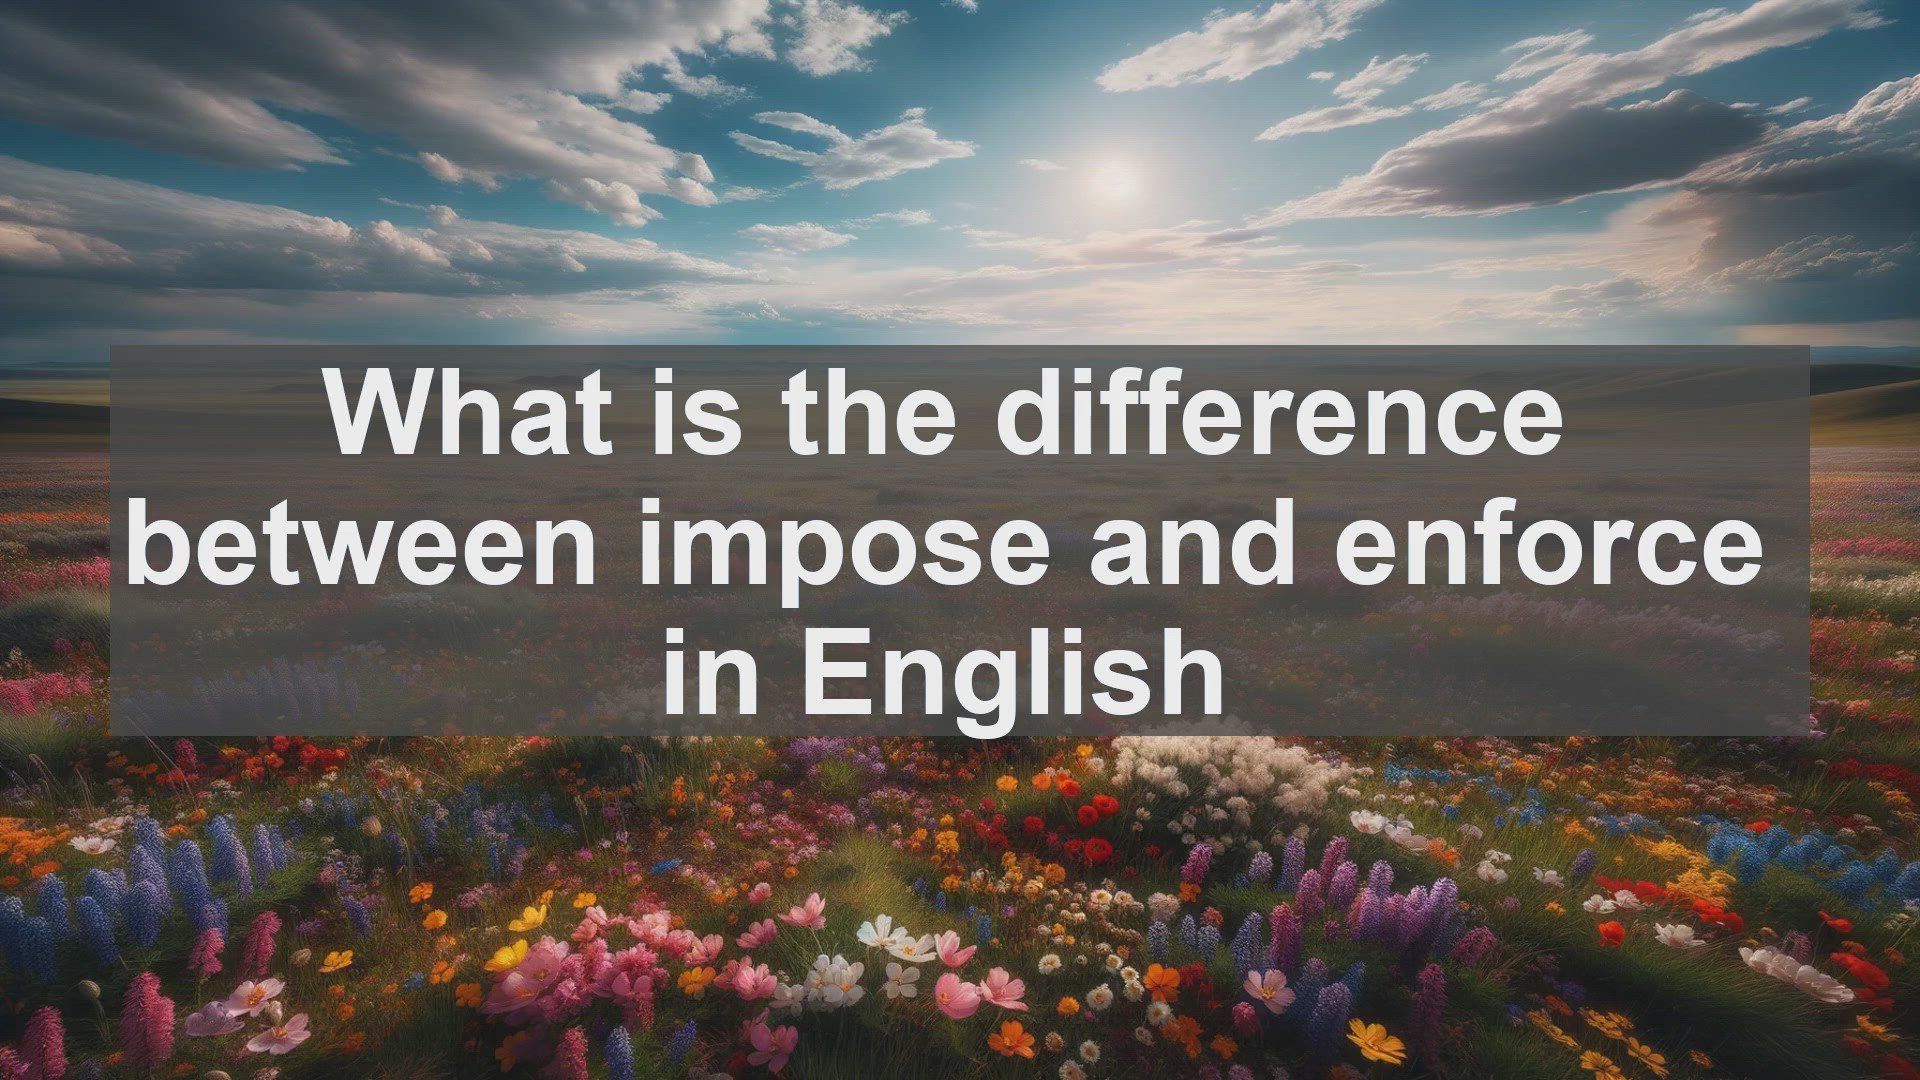 What is the difference between impose and enforce in English?